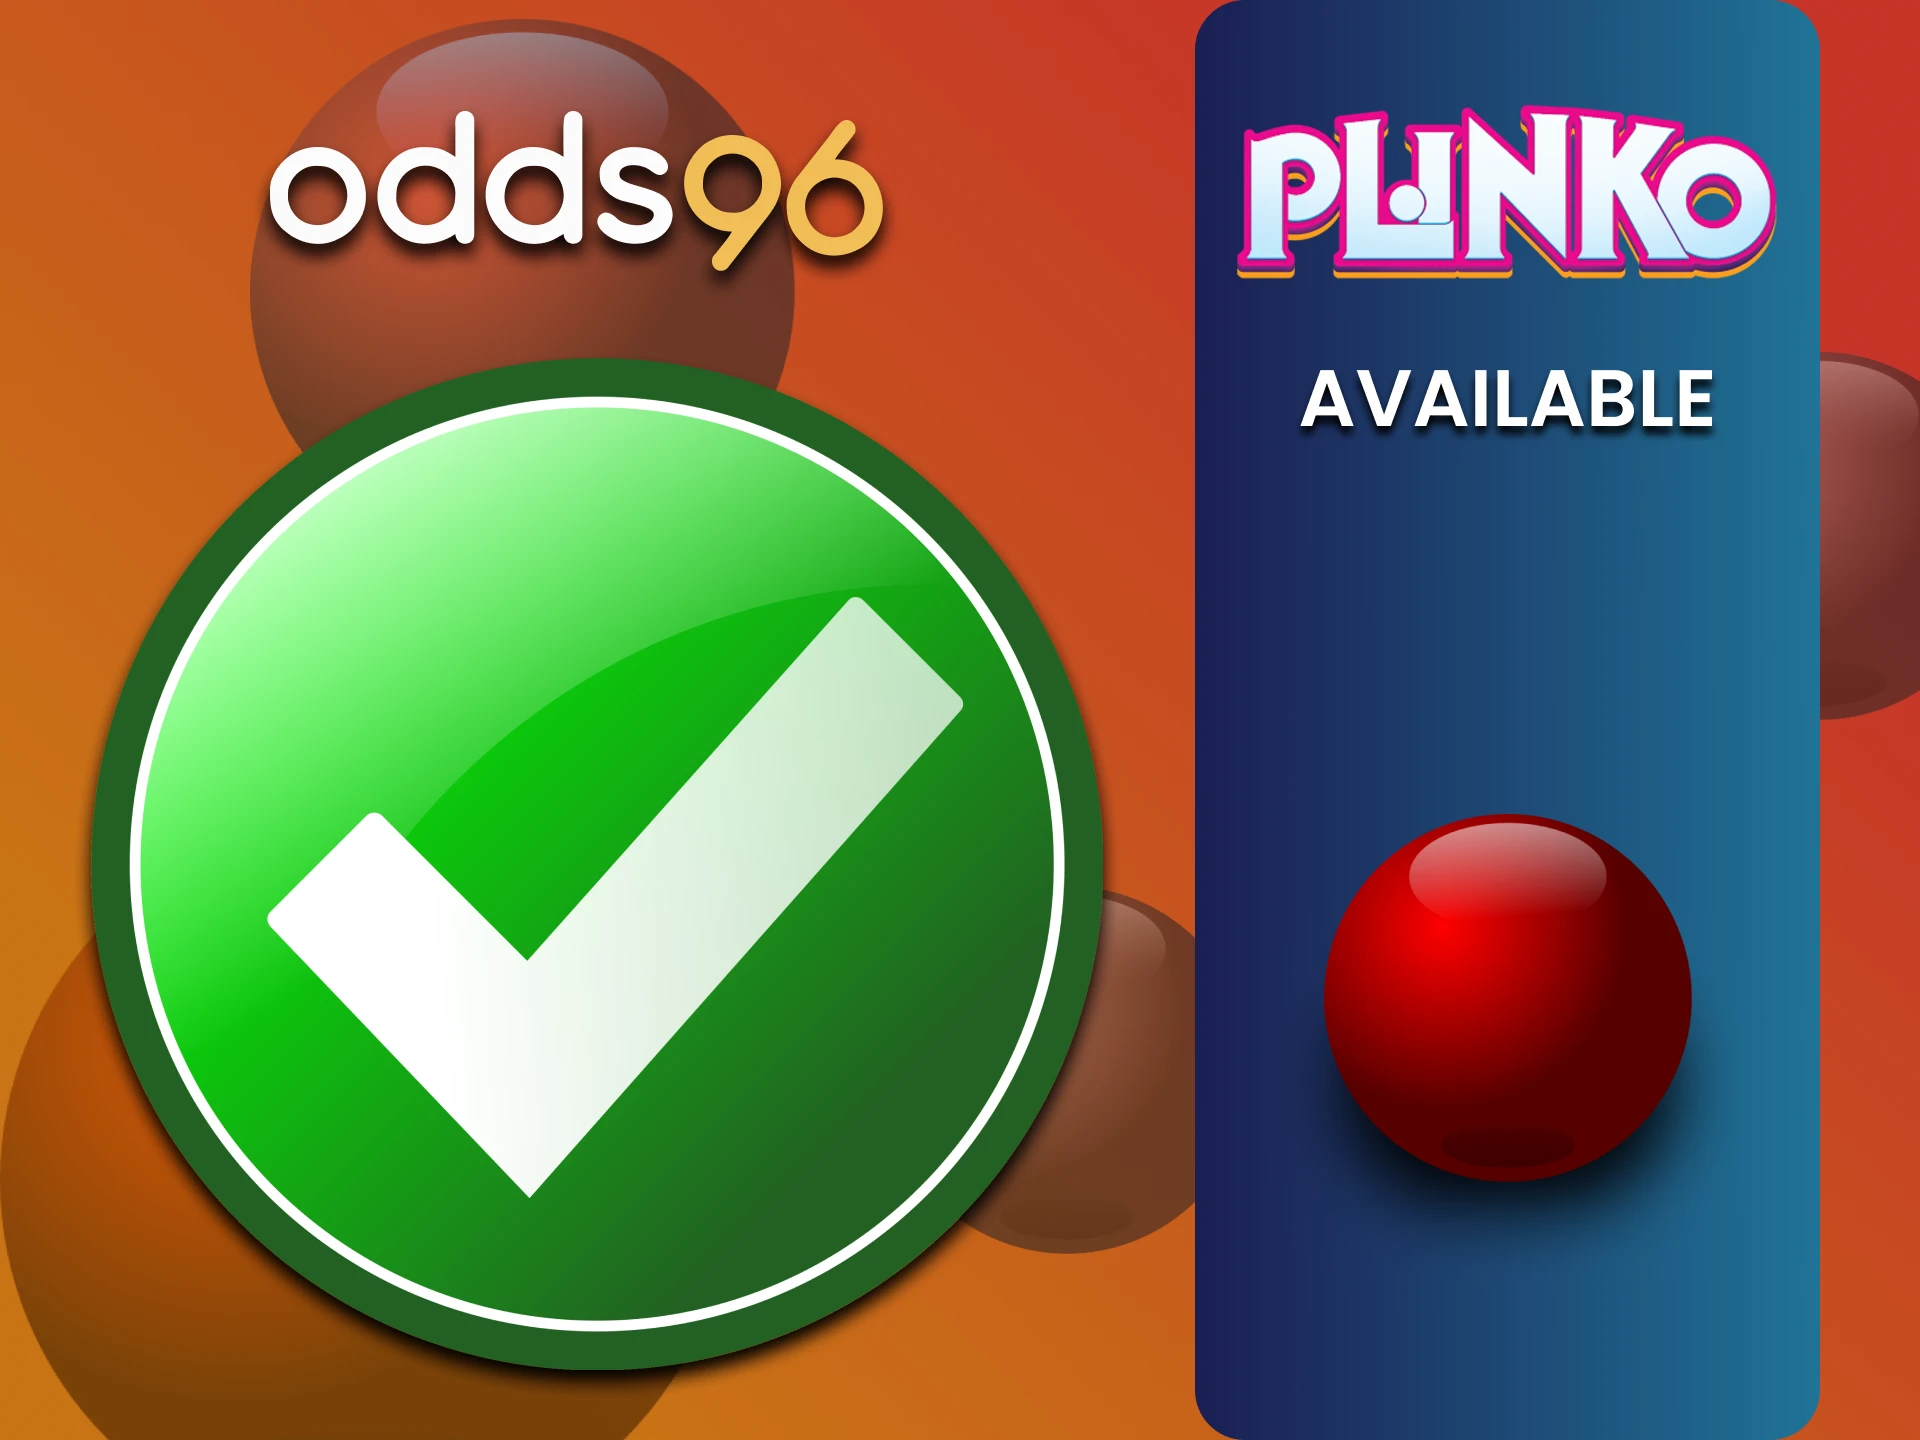 We will tell you what types of Plinko are available on the Odds96 website.